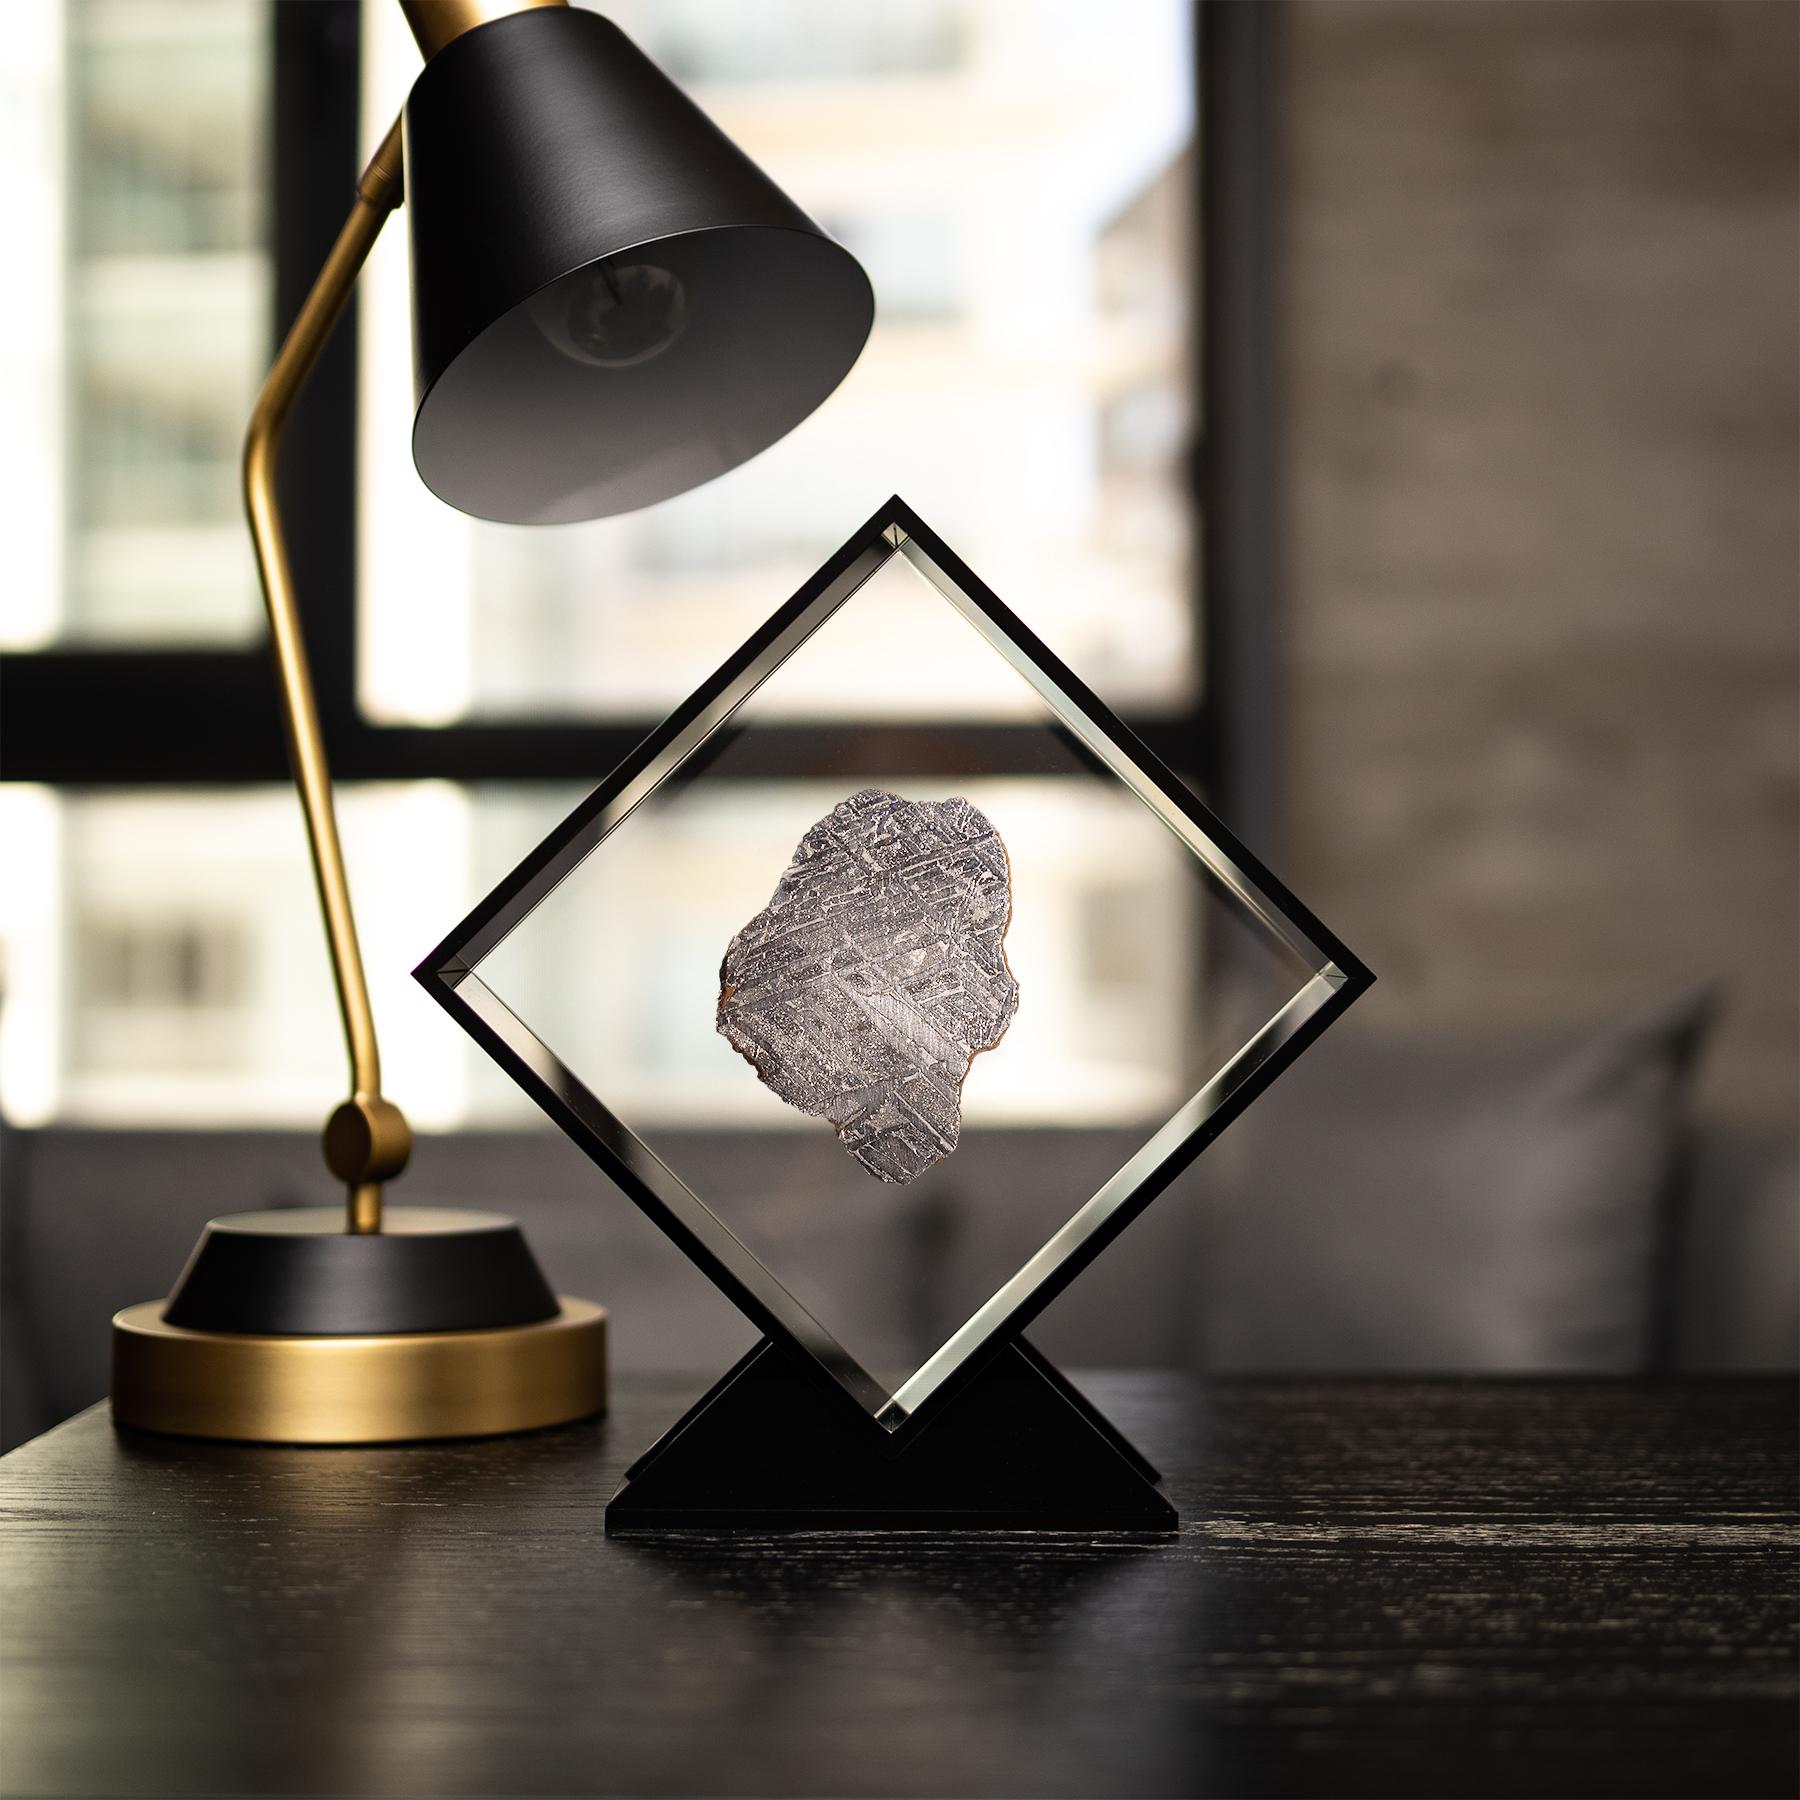 Original design in Acrylic display with a magnet making the Meteorite look as it´s floating the same way it did in outer space for years before its final visit to Earth. 
Seymchan Meteorite 
Origin: Magadan Oblast, Russia
Classification: